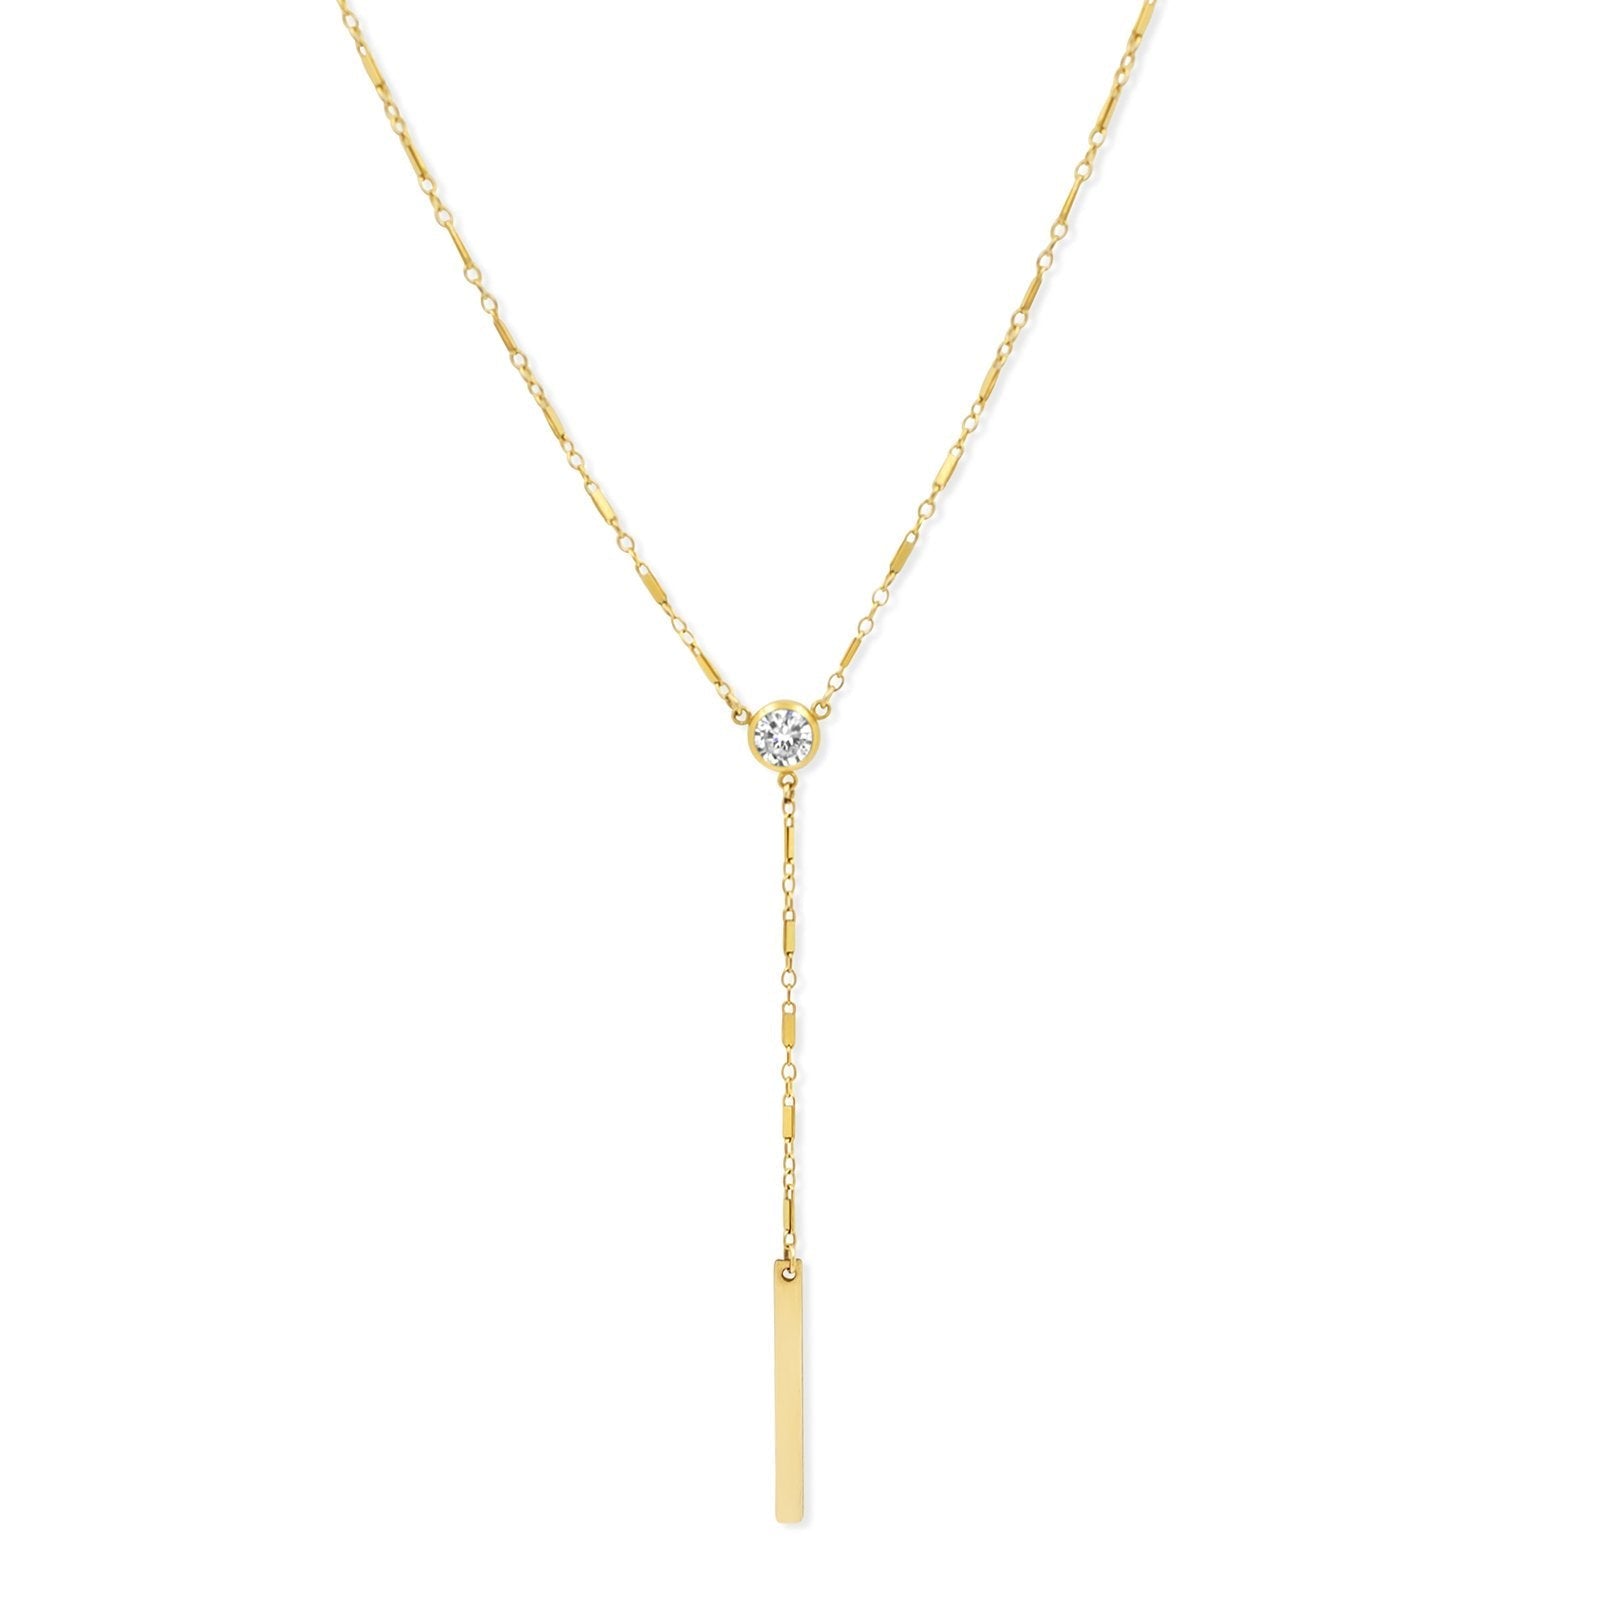 Gold Filled - Y Gold Station Necklace - Camille Jewelry